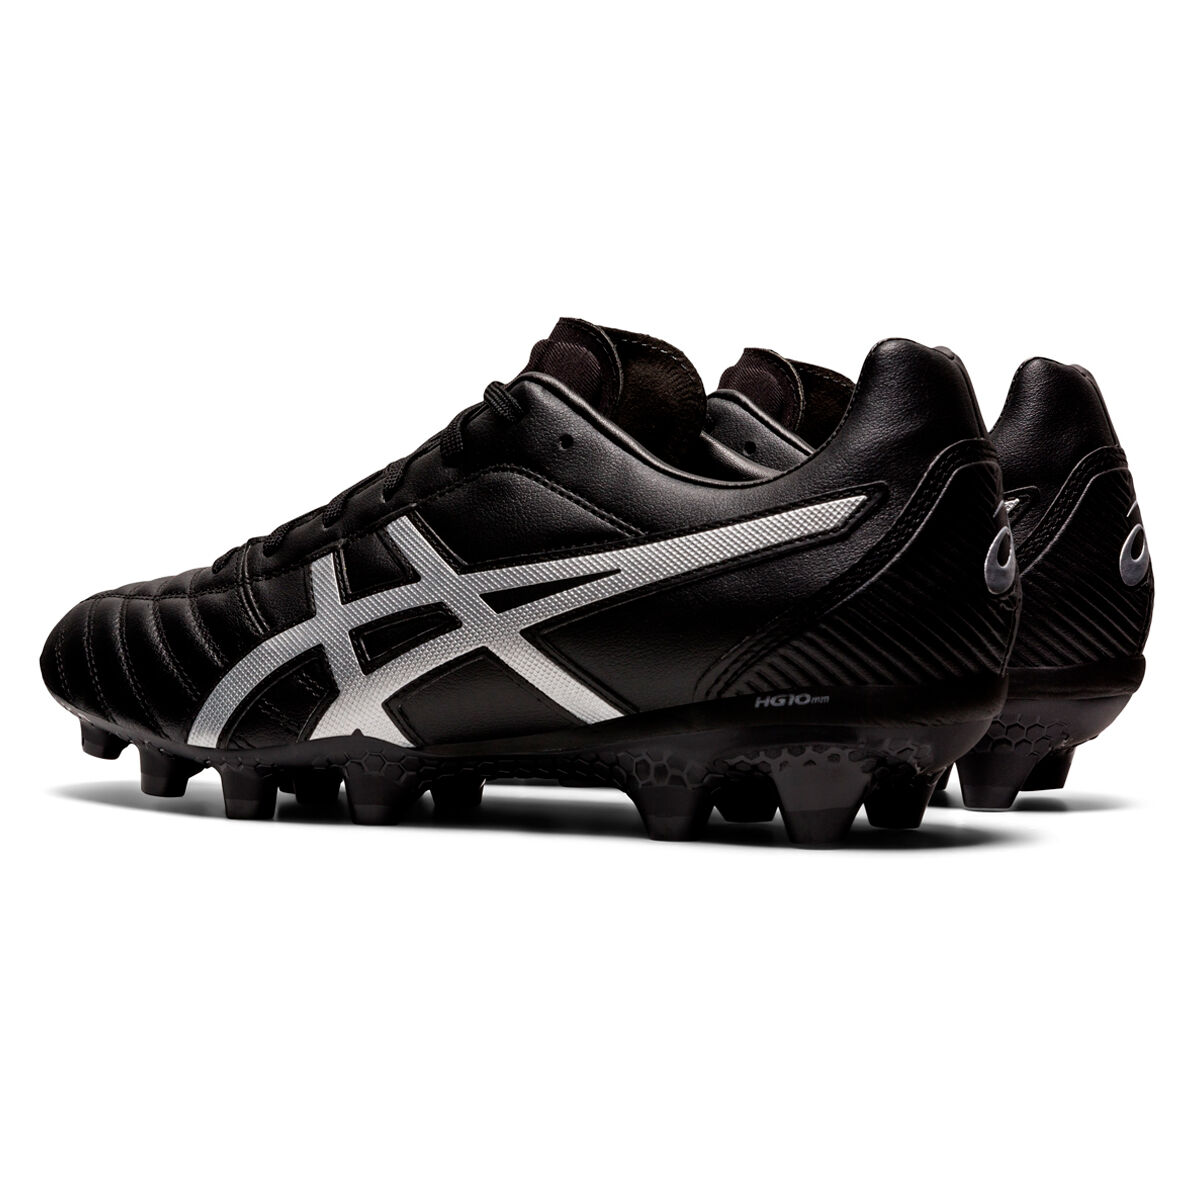 all black asics footy boots